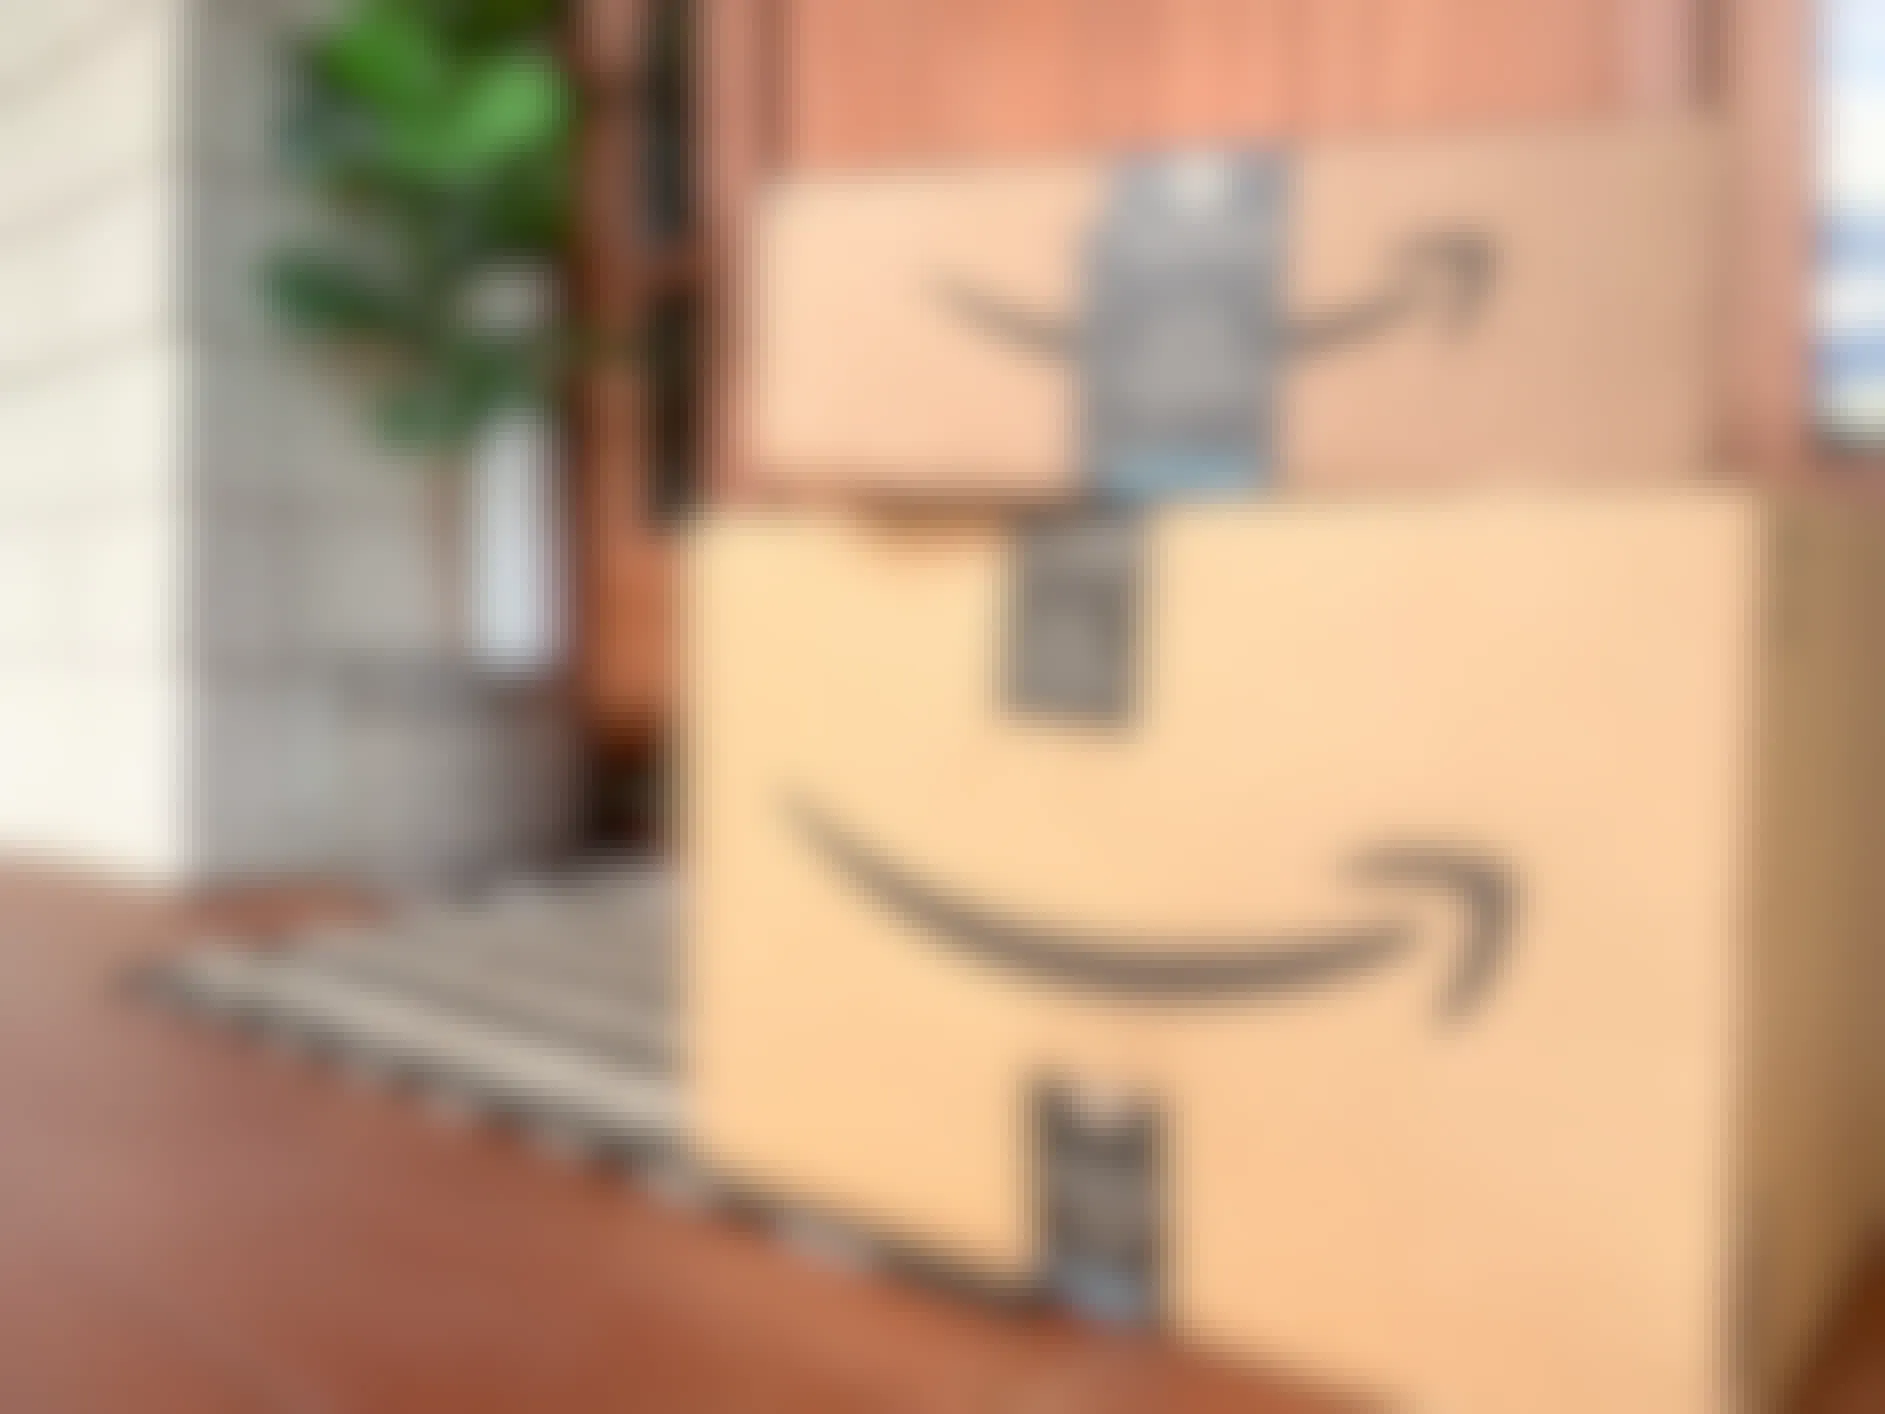 amazon boxes stacked near front door